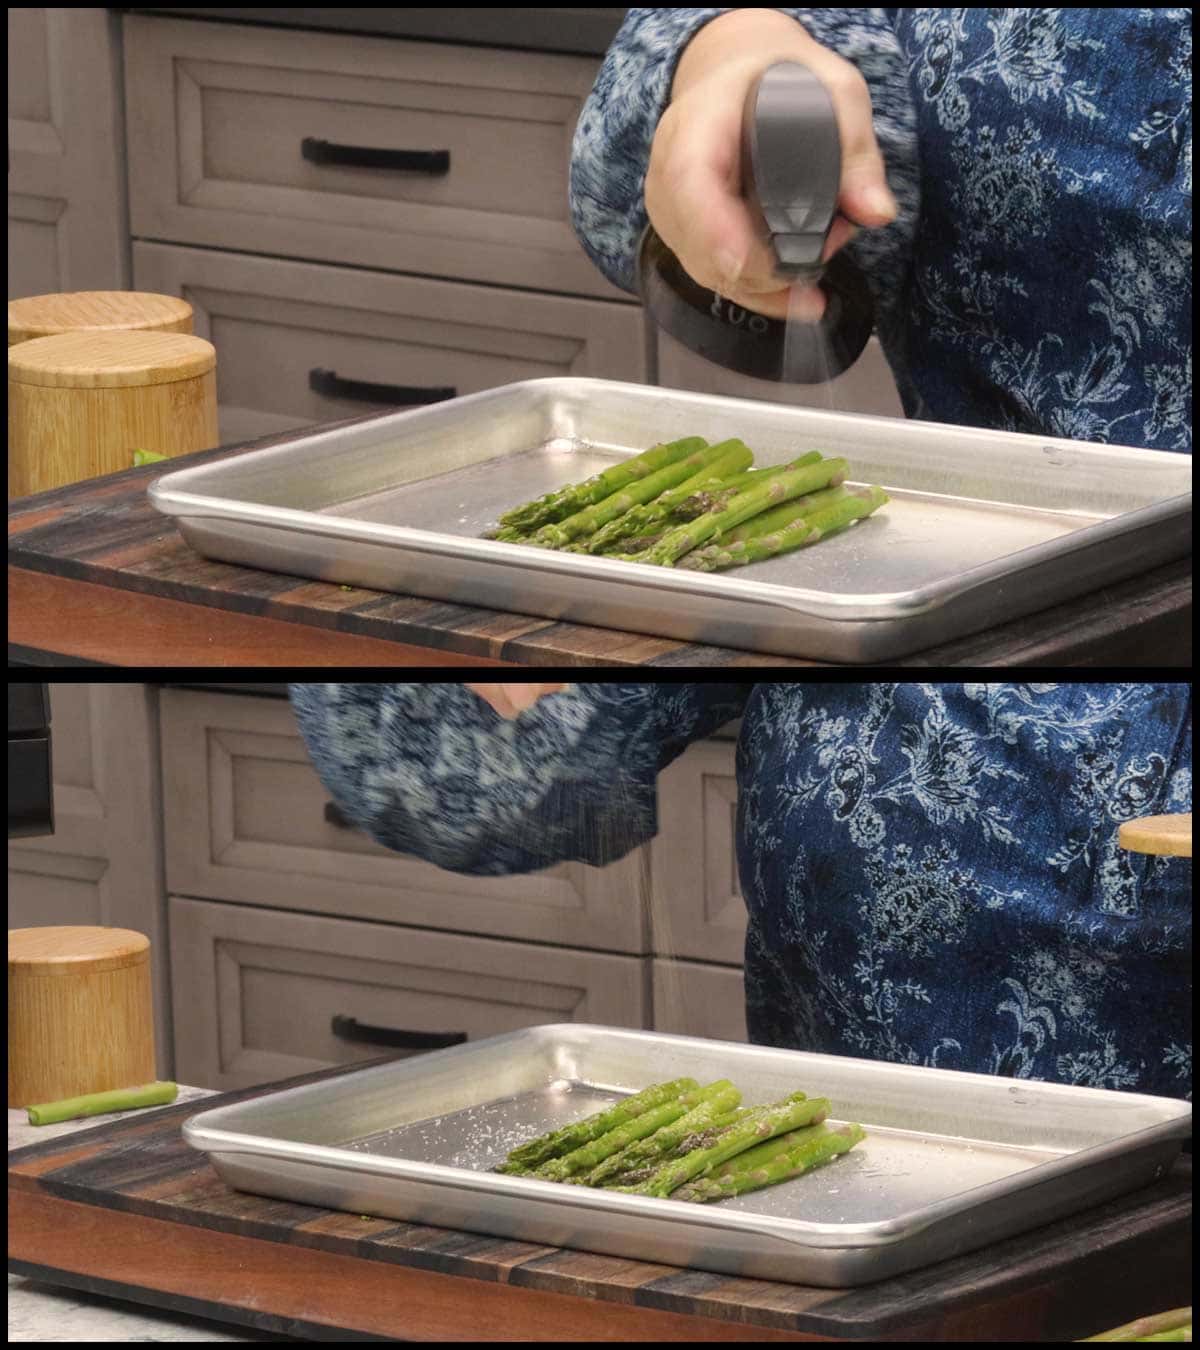 oiling and seasoning asparagus prior to cooking with steam and crisp.